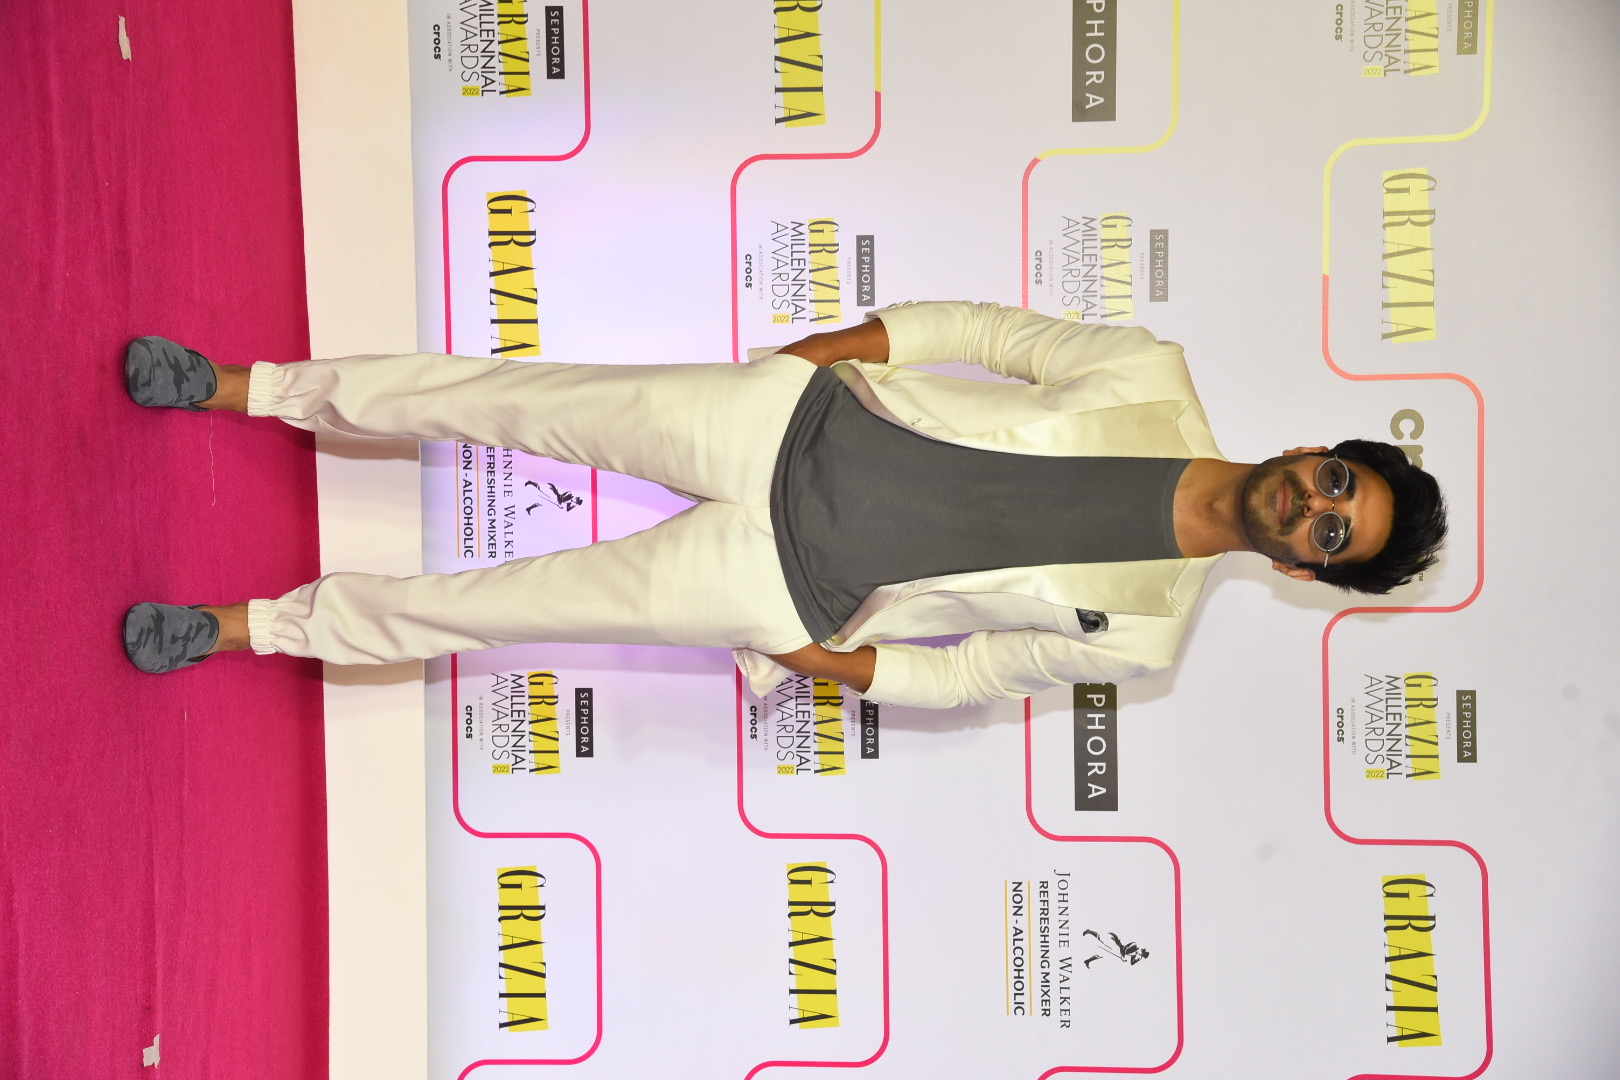 Aparshakti Khurana looks handsome in the white casual suit